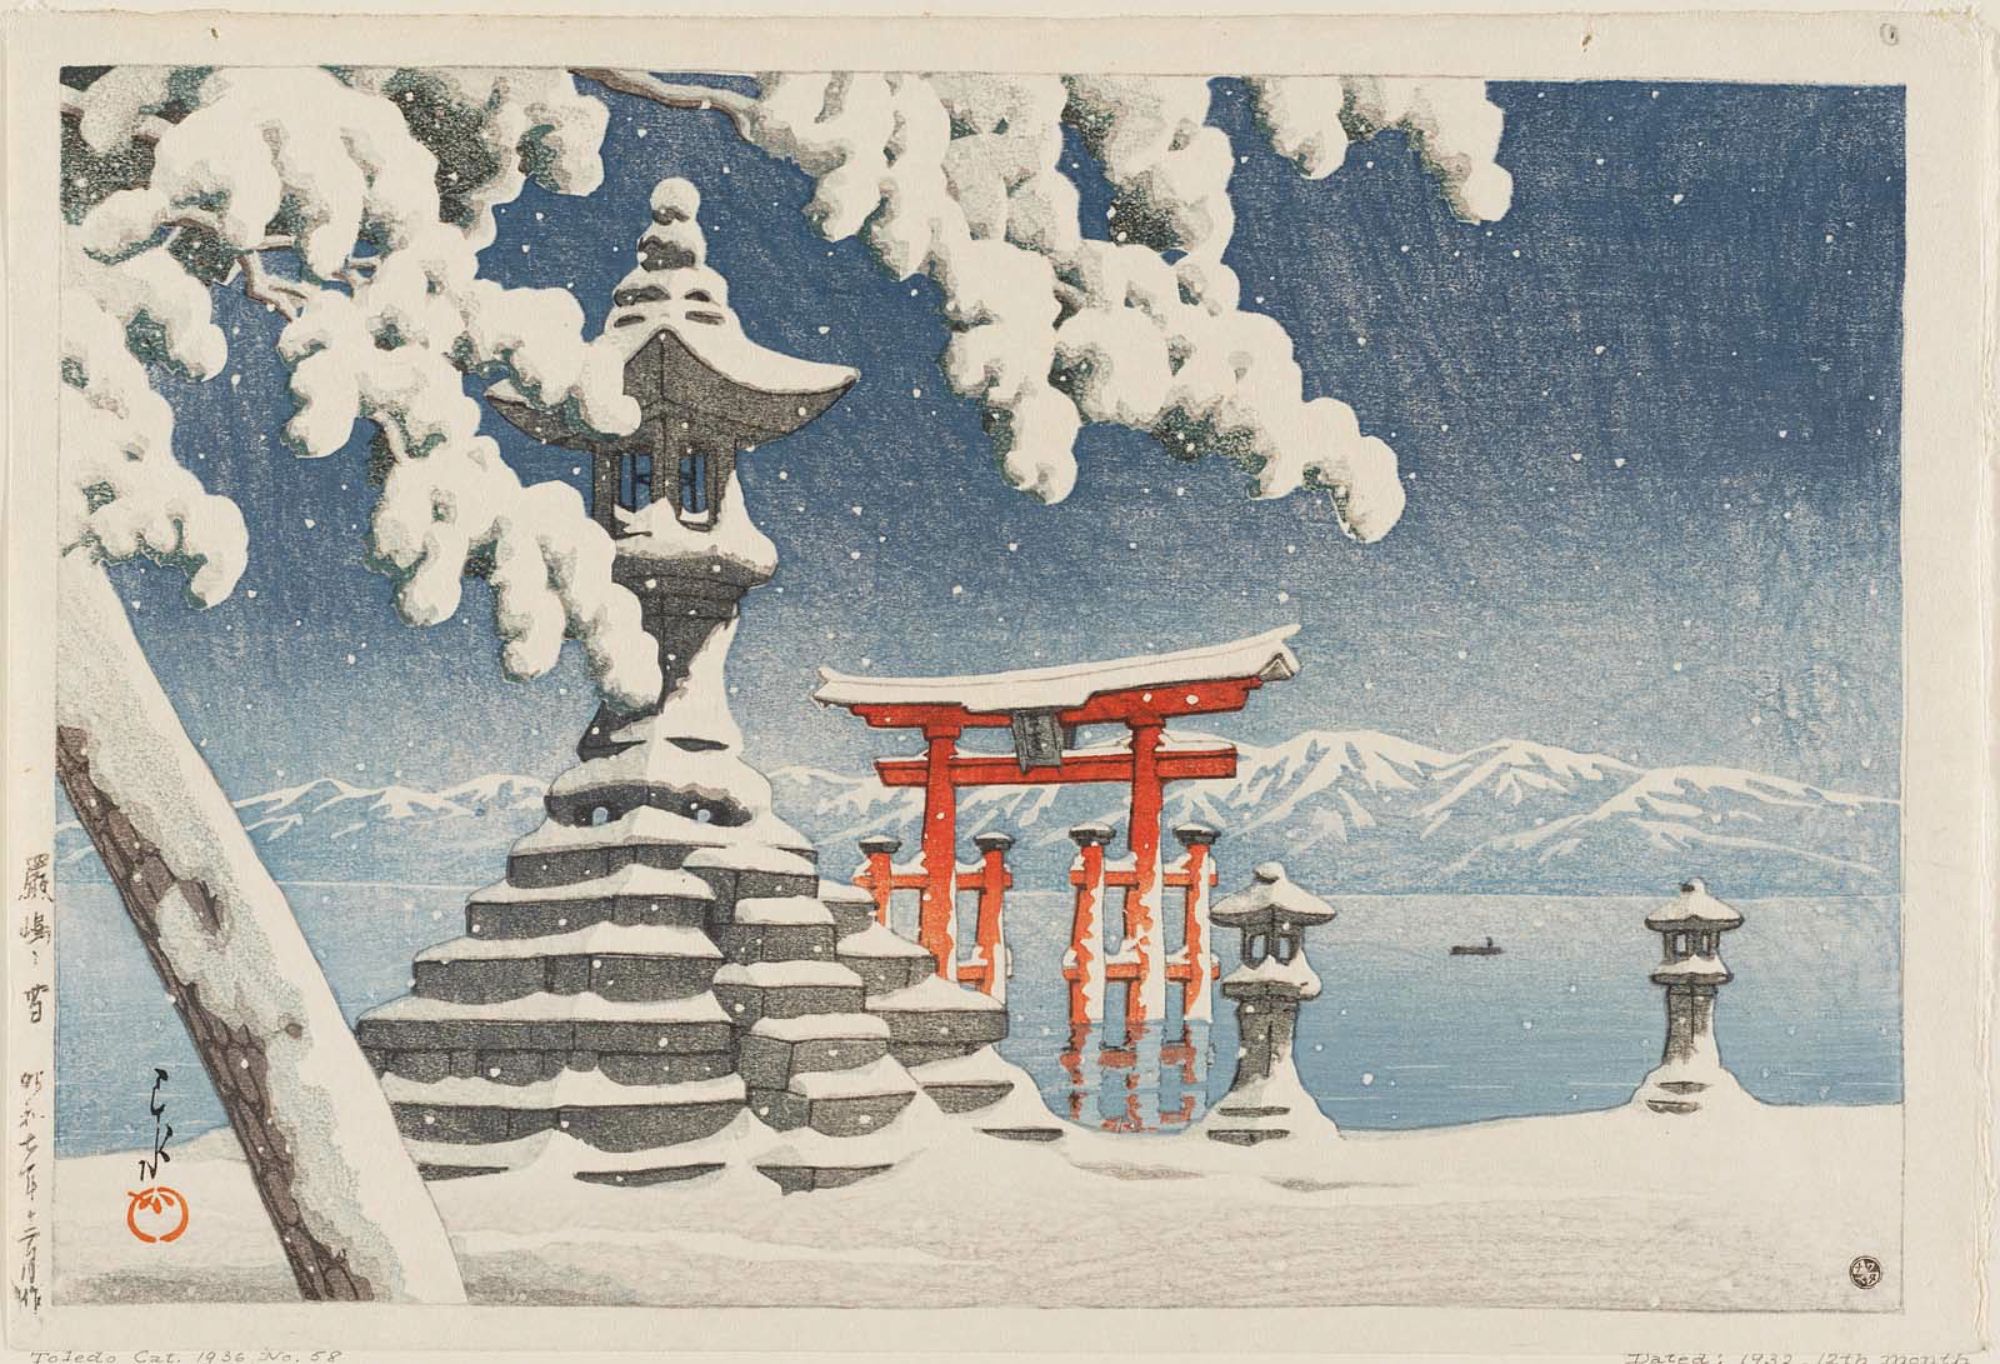 Snow at Itsukushima by Hasui Kawase - 1932 - 26.5 × 39.5 cm Art Institute of Chicago